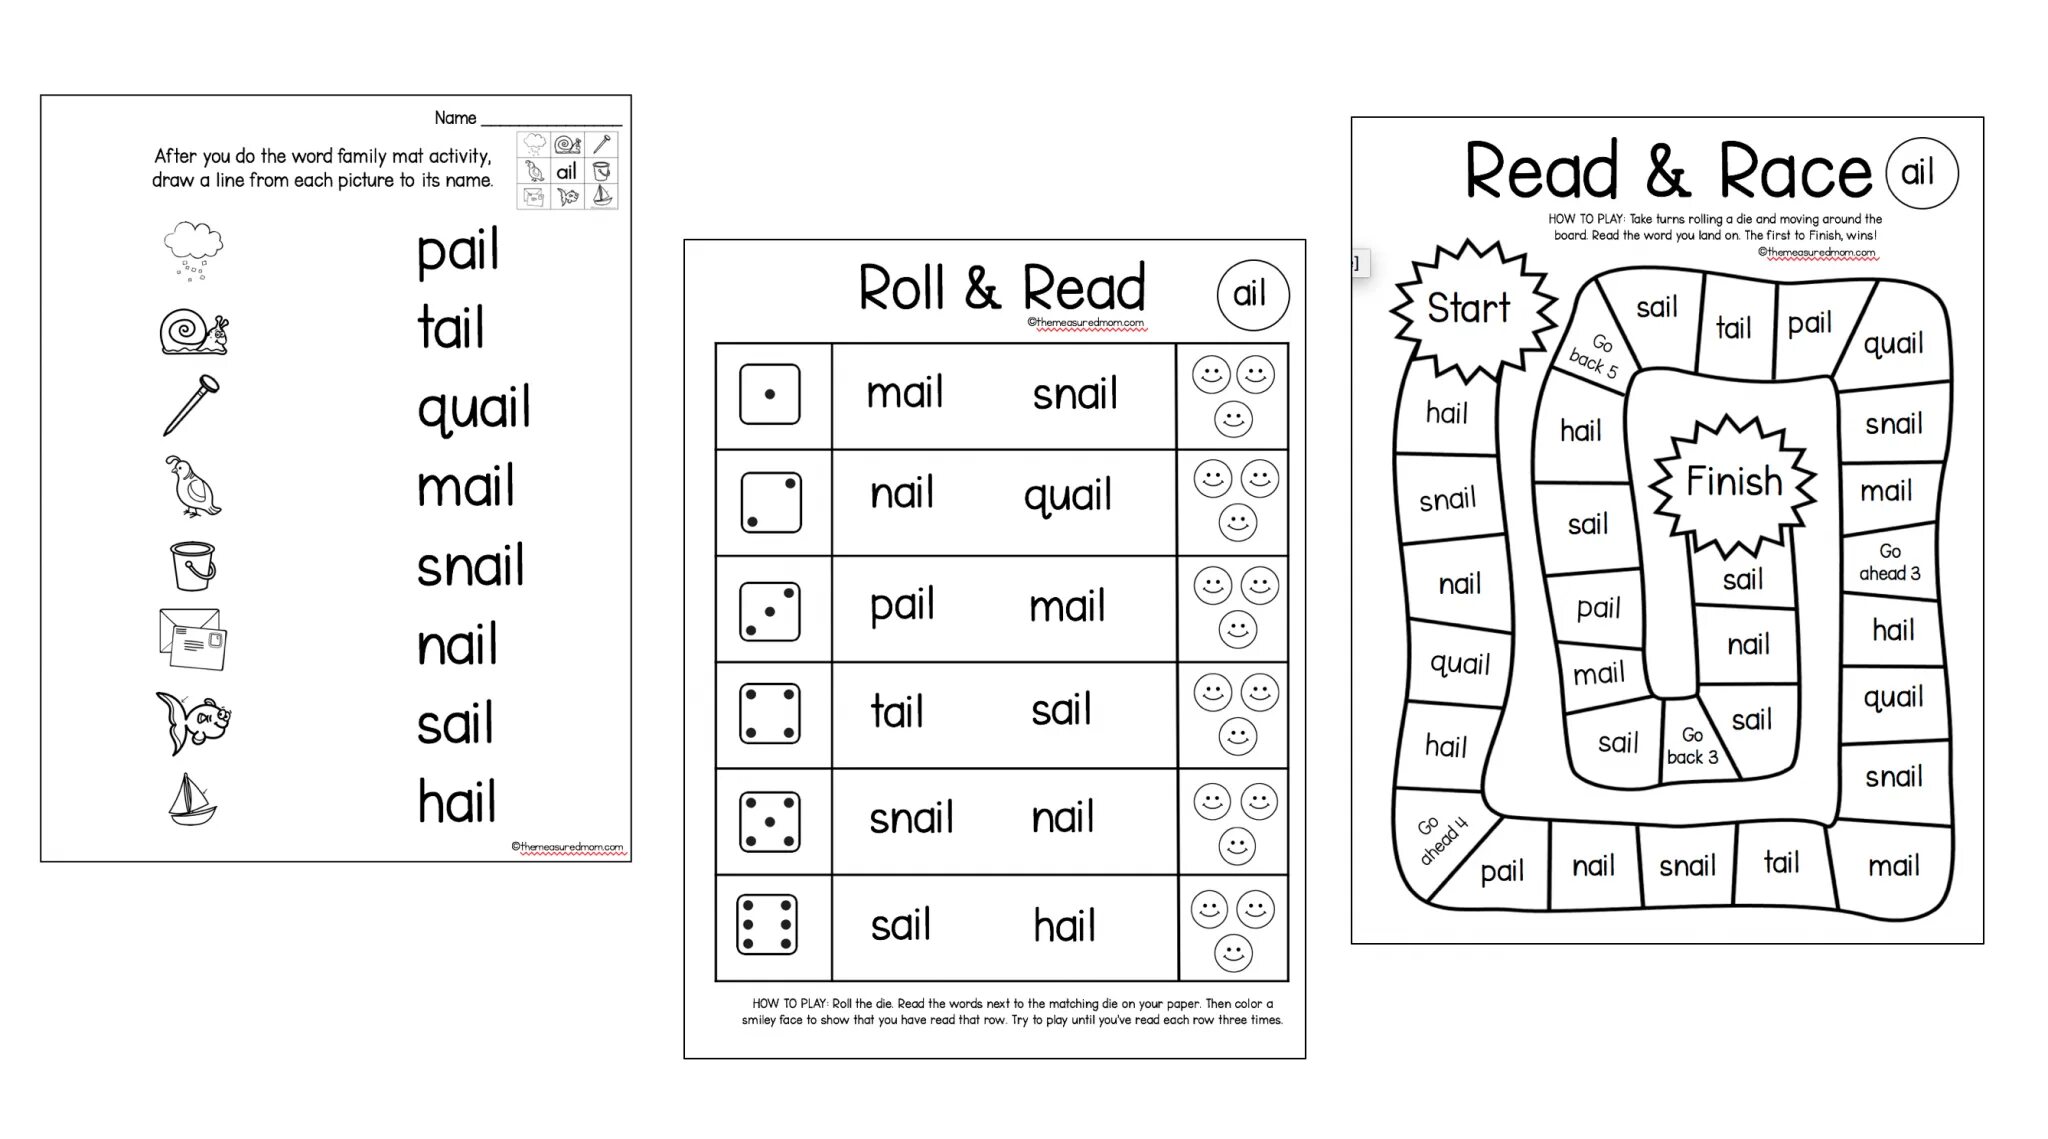 Long Vowels Board game. Vowels задания для детей. Short Vowels Board game. Roll and read Phonics for Kids. Read and draw pictures